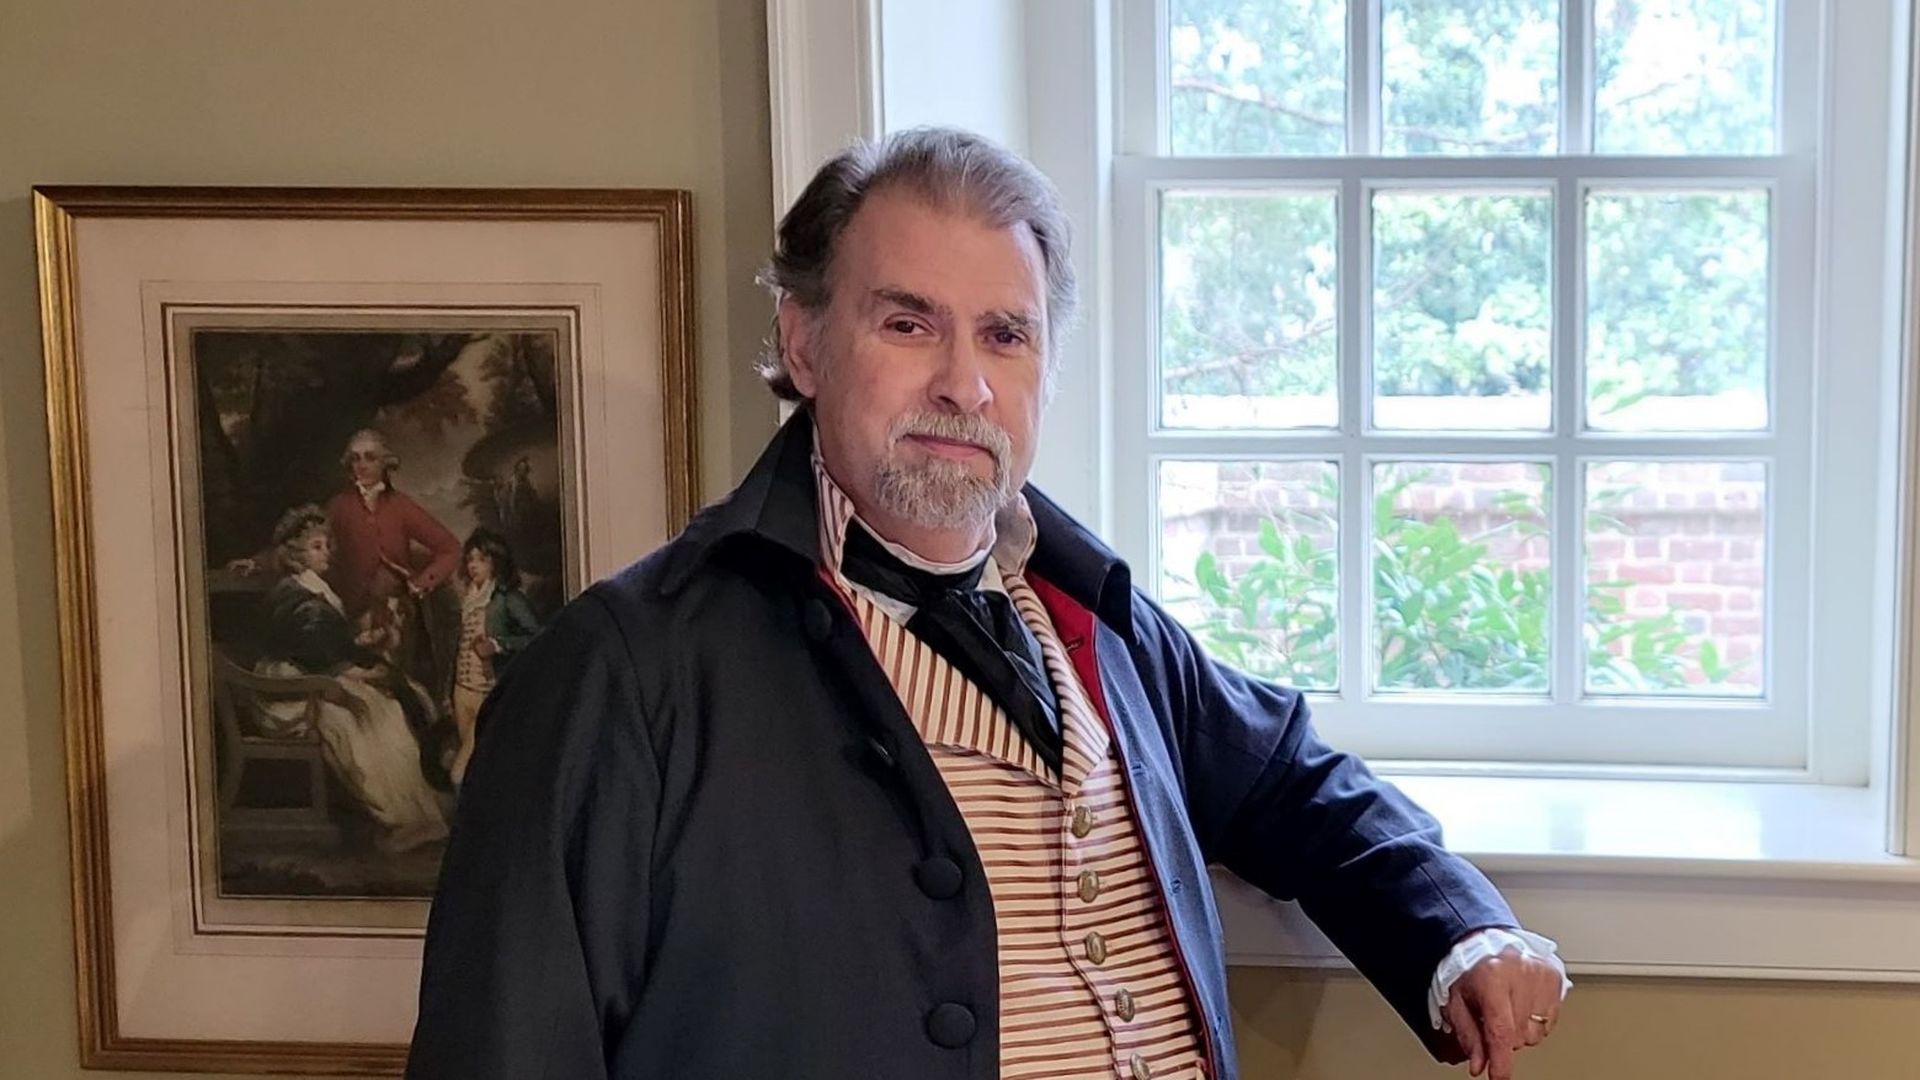 Tom Plott, head of character interpretation at Mount Vernon, dressed in 18th century clothing (a blue wool suite and striped vest) as Dr. James Craik